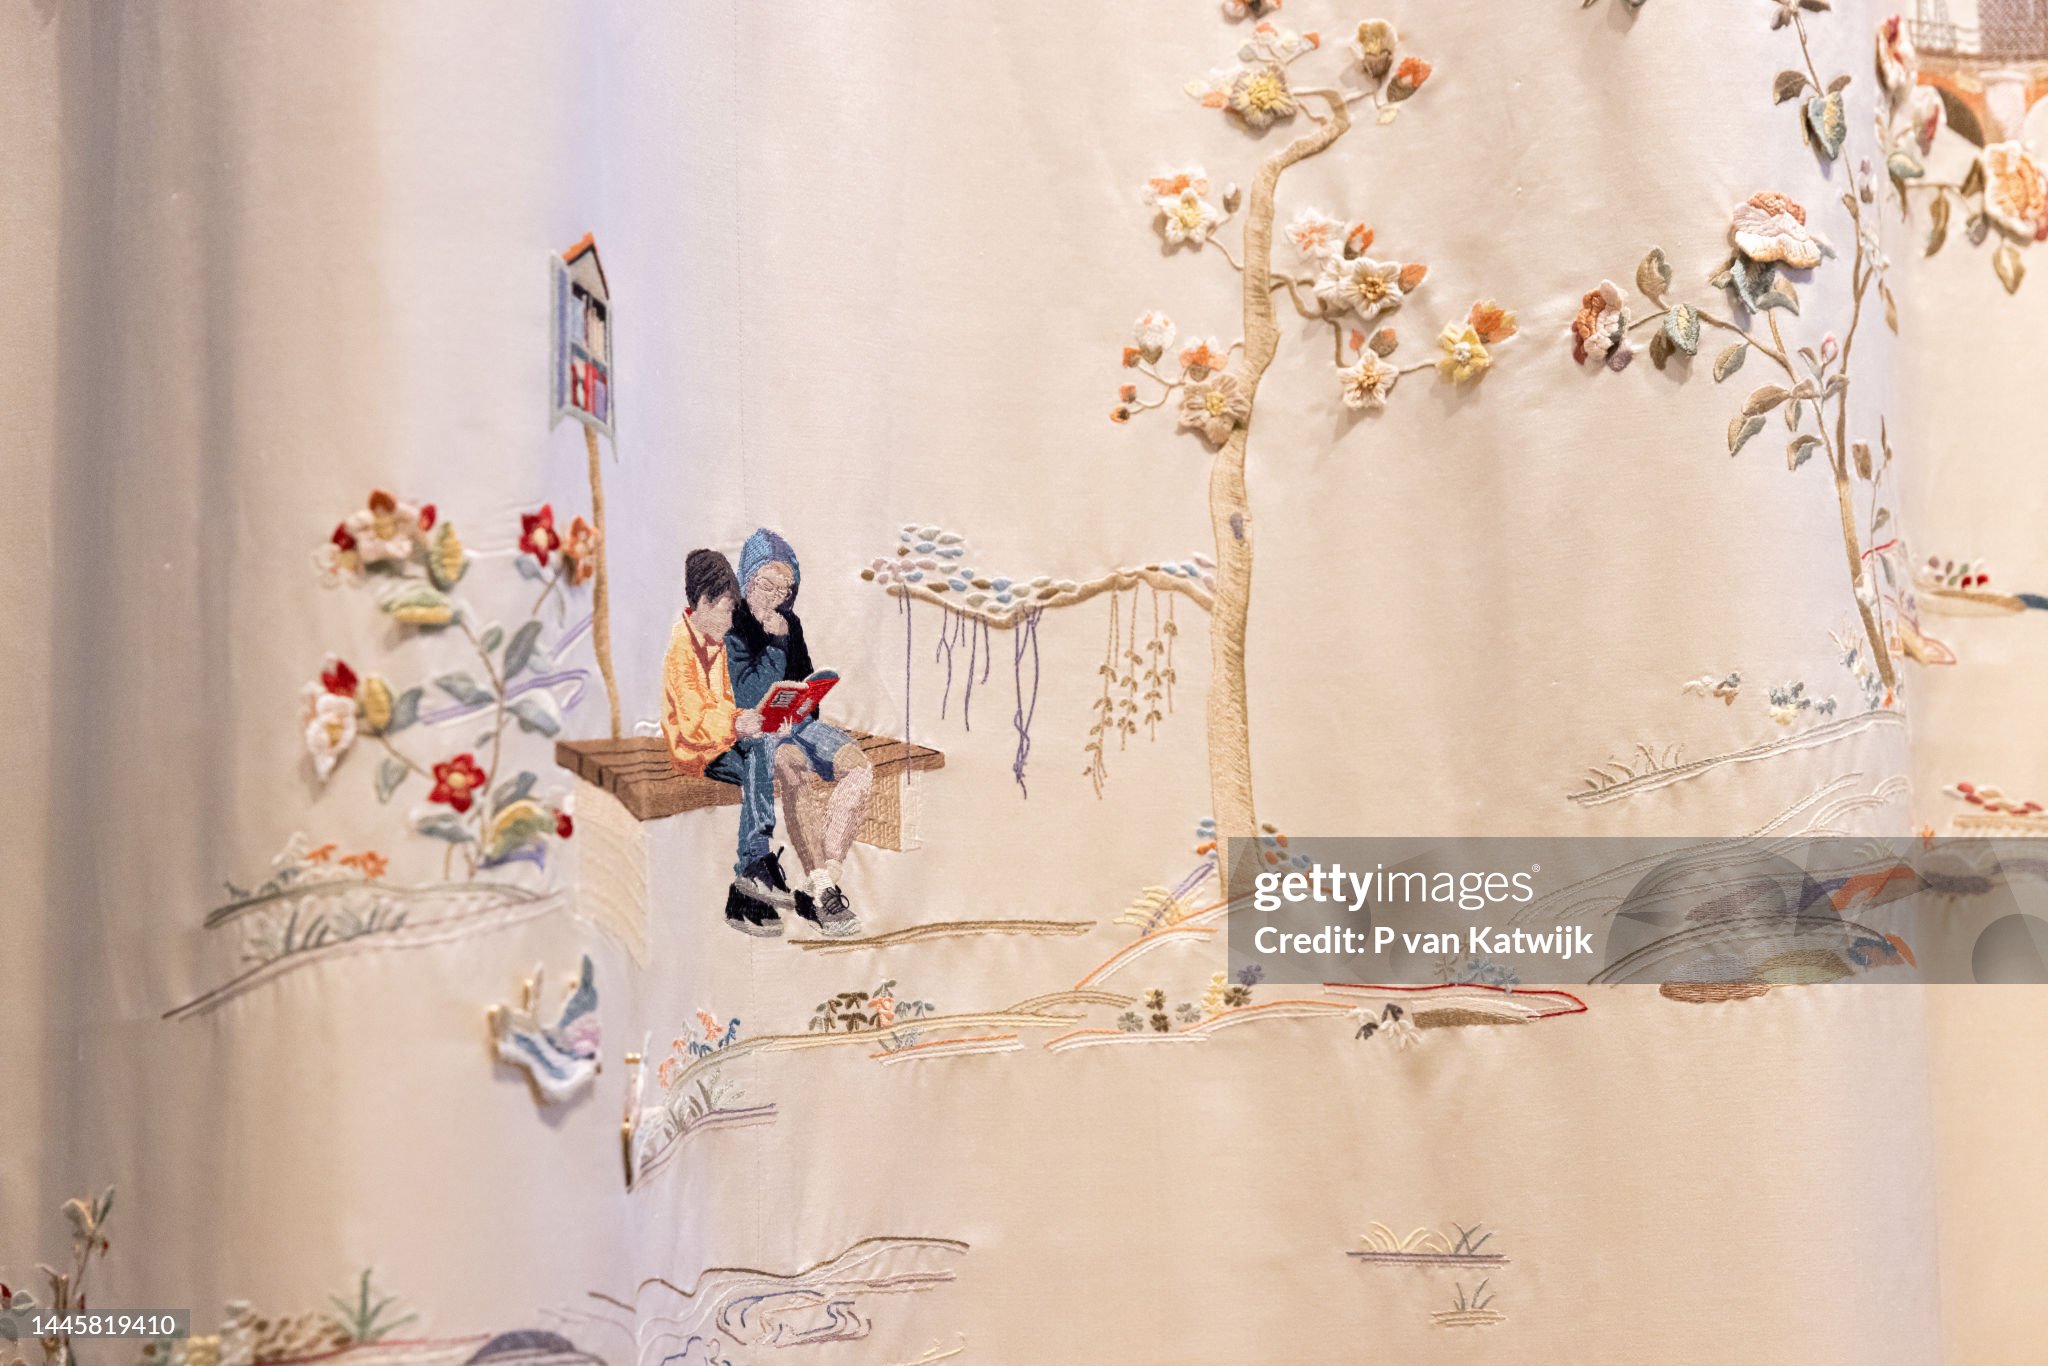 queen-maxima-of-the-netherlands-visits-textile-museum-to-present-her-new-curtains-for-palace.jpg?s=2048x2048&w=gi&k=20&c=4rVXcpOwSuYOUOXssEkBuS7y0dXgrfzlkmuR4PozX_I=